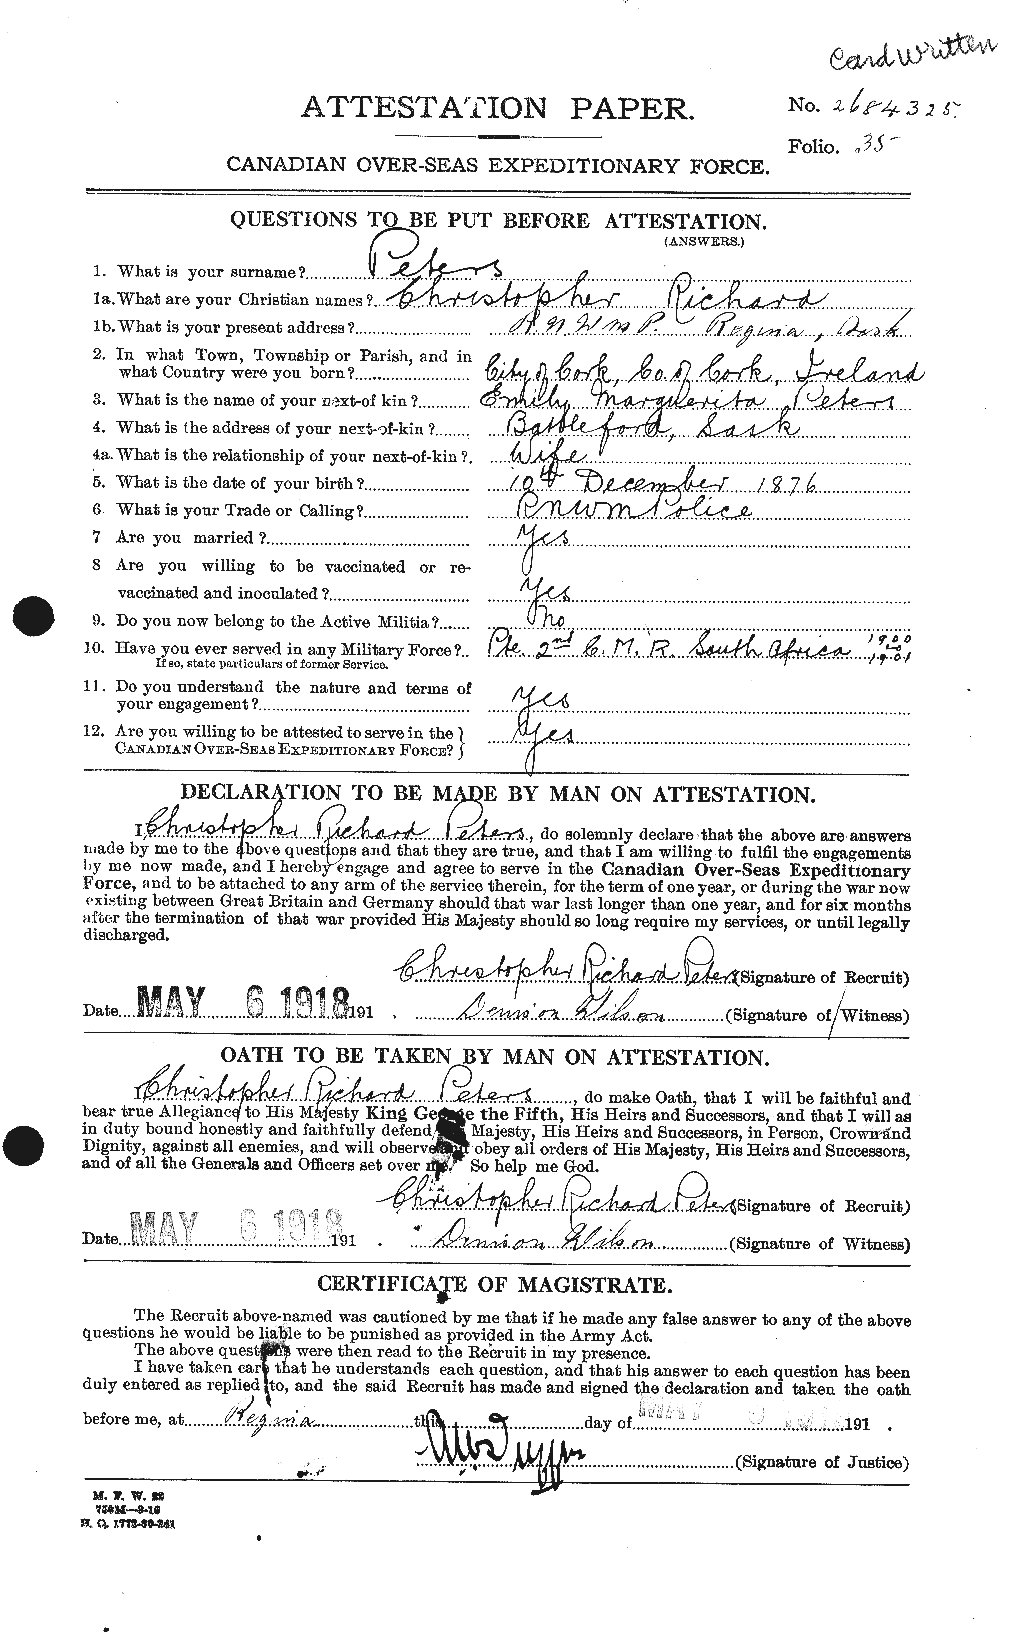 Personnel Records of the First World War - CEF 575374a